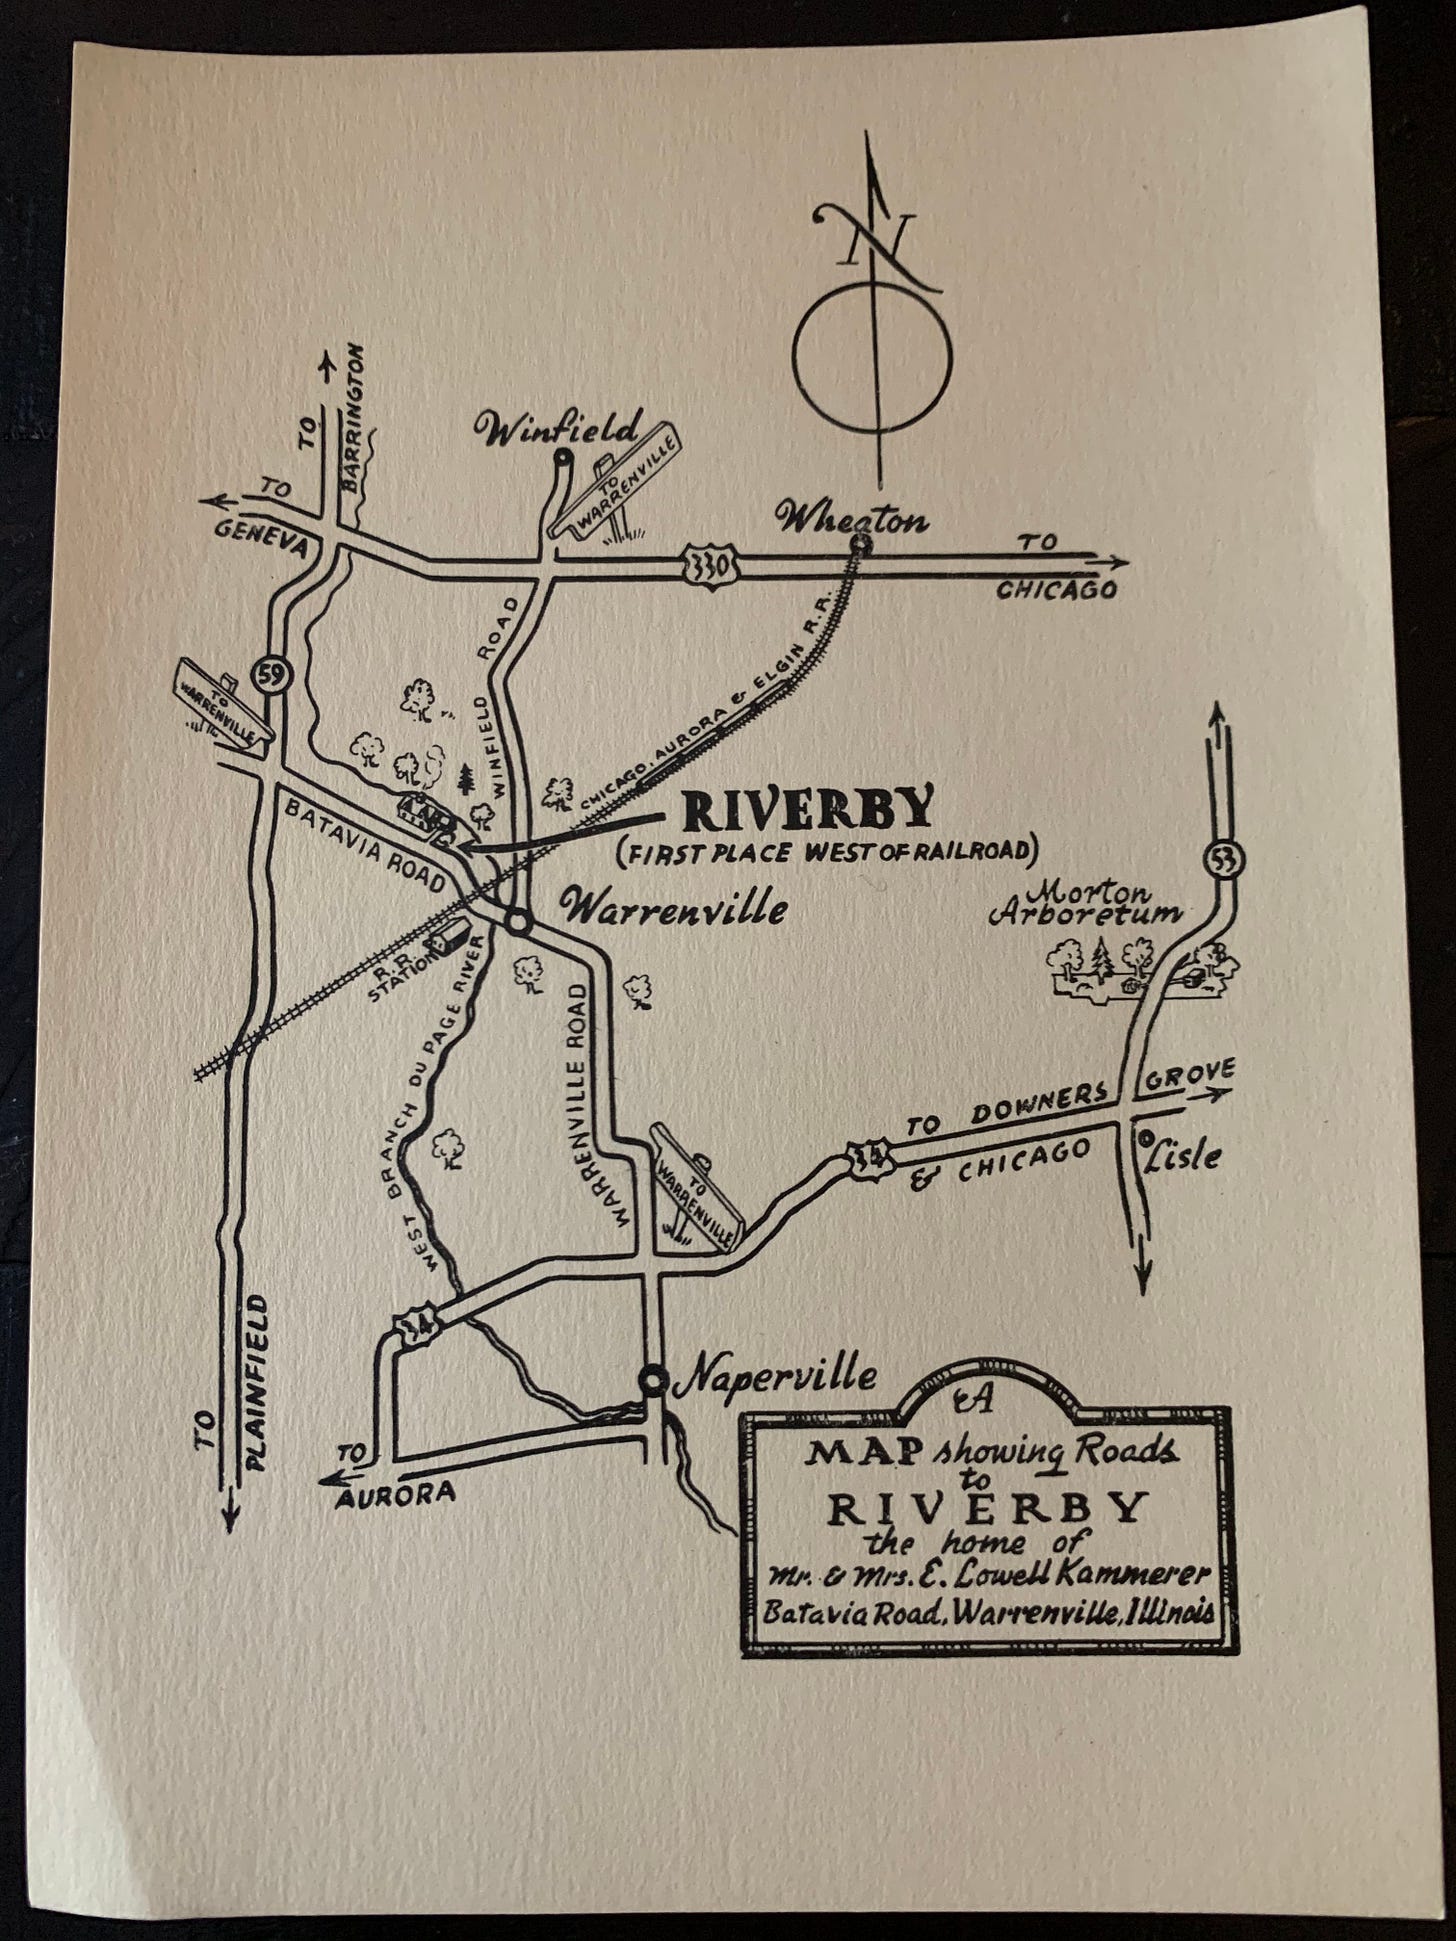 An ink drawn map of where Riverby is located along with some nearby locations, like the Arboretum.